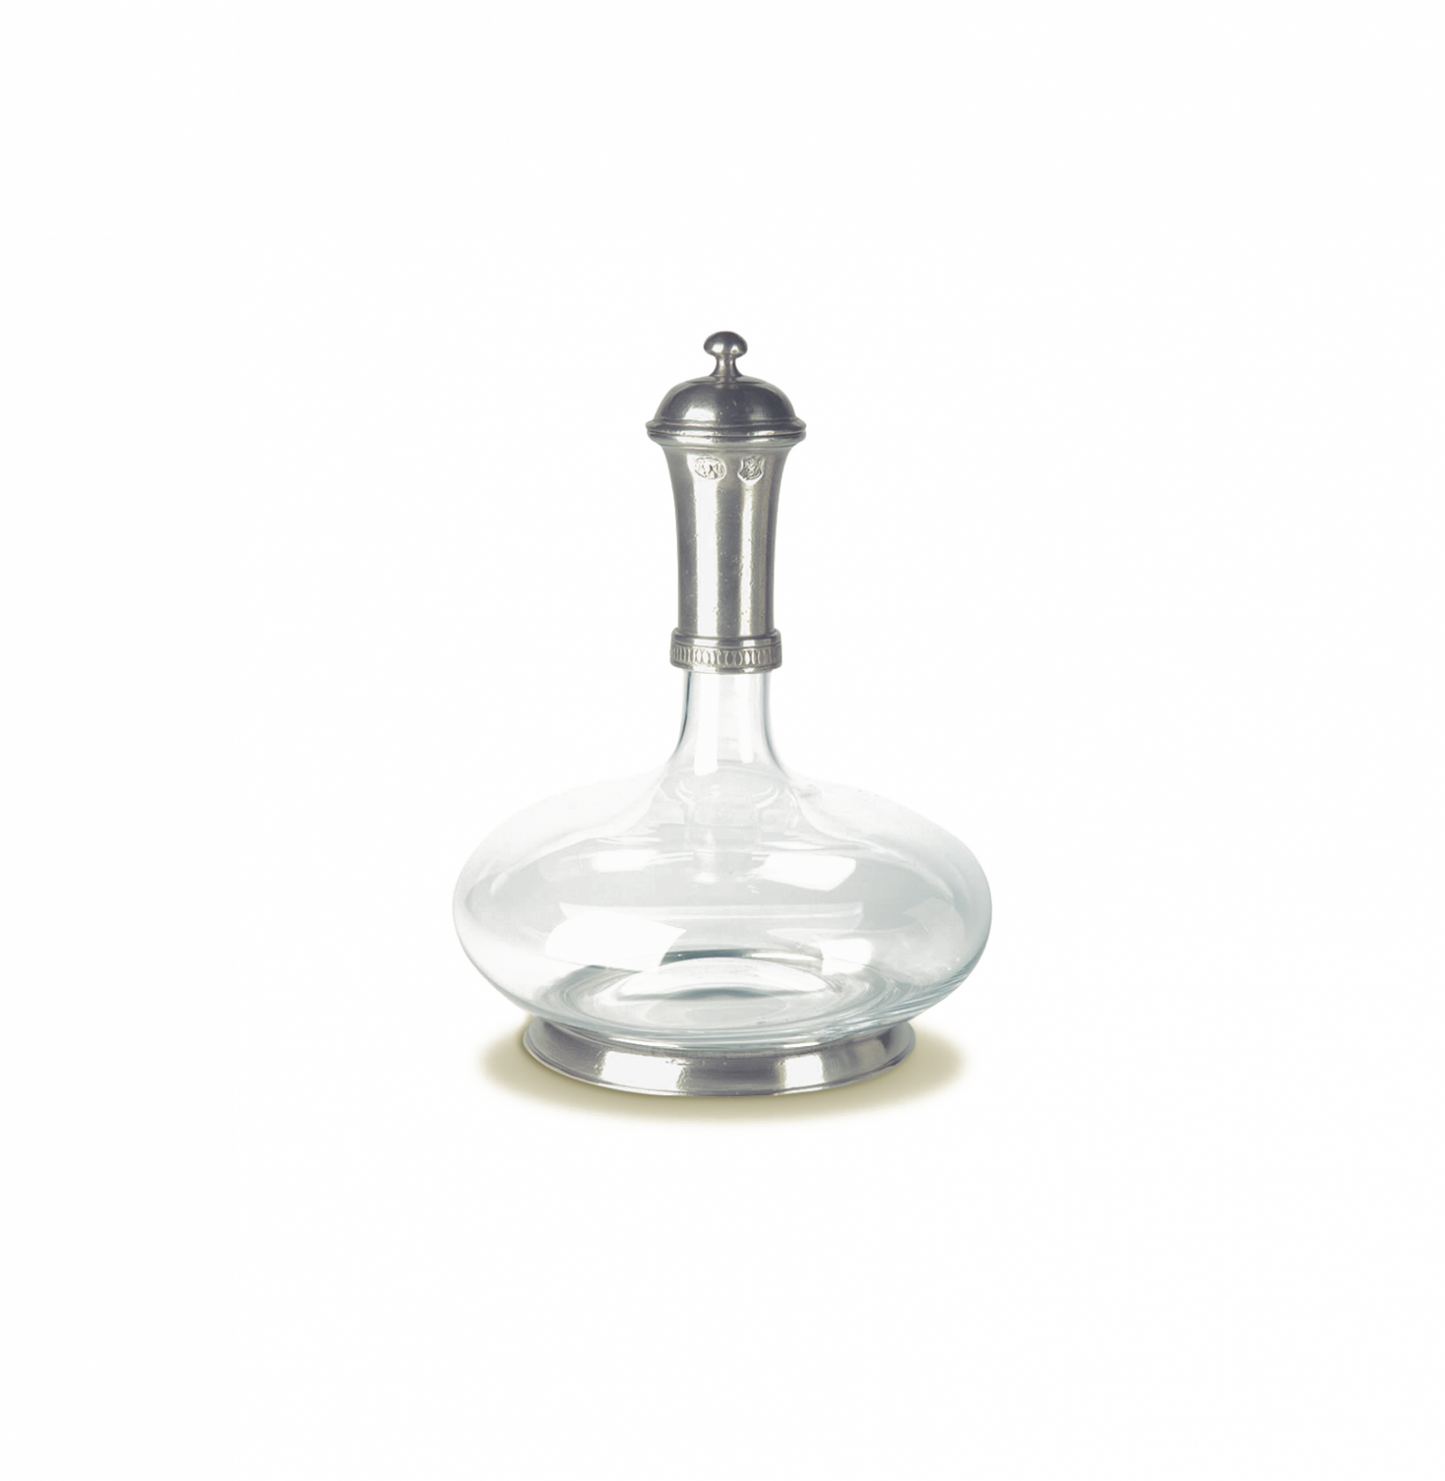 Match Pewter Wine Decanter with Top